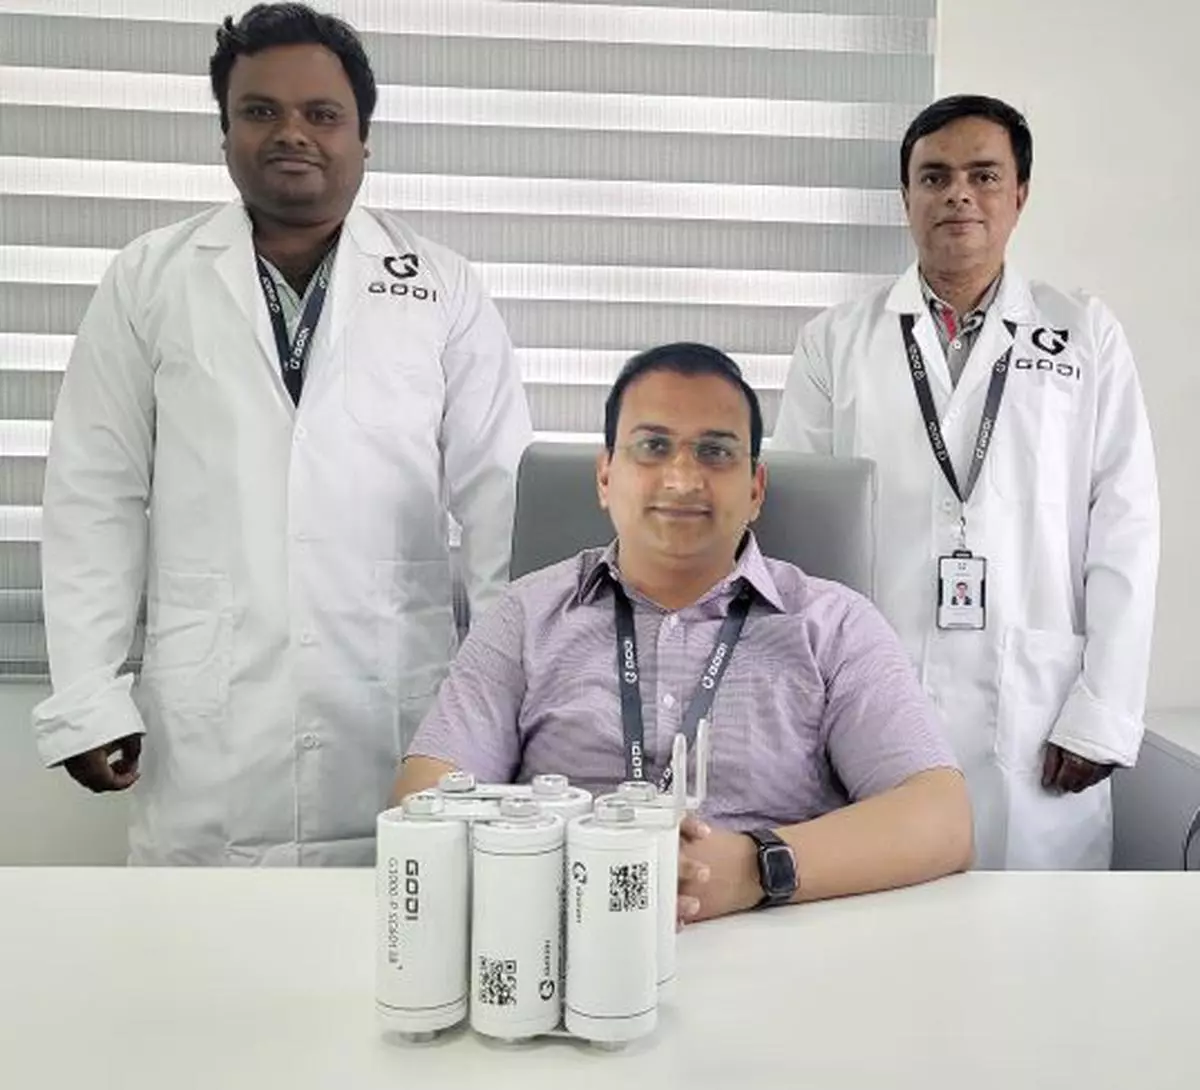 (From left to right) Dr Milan Jana, Research & Development Manager, Mahesh Godi, Founder and CEO, and Dr Pushpendra Singh, Senior Scientist, GODI India